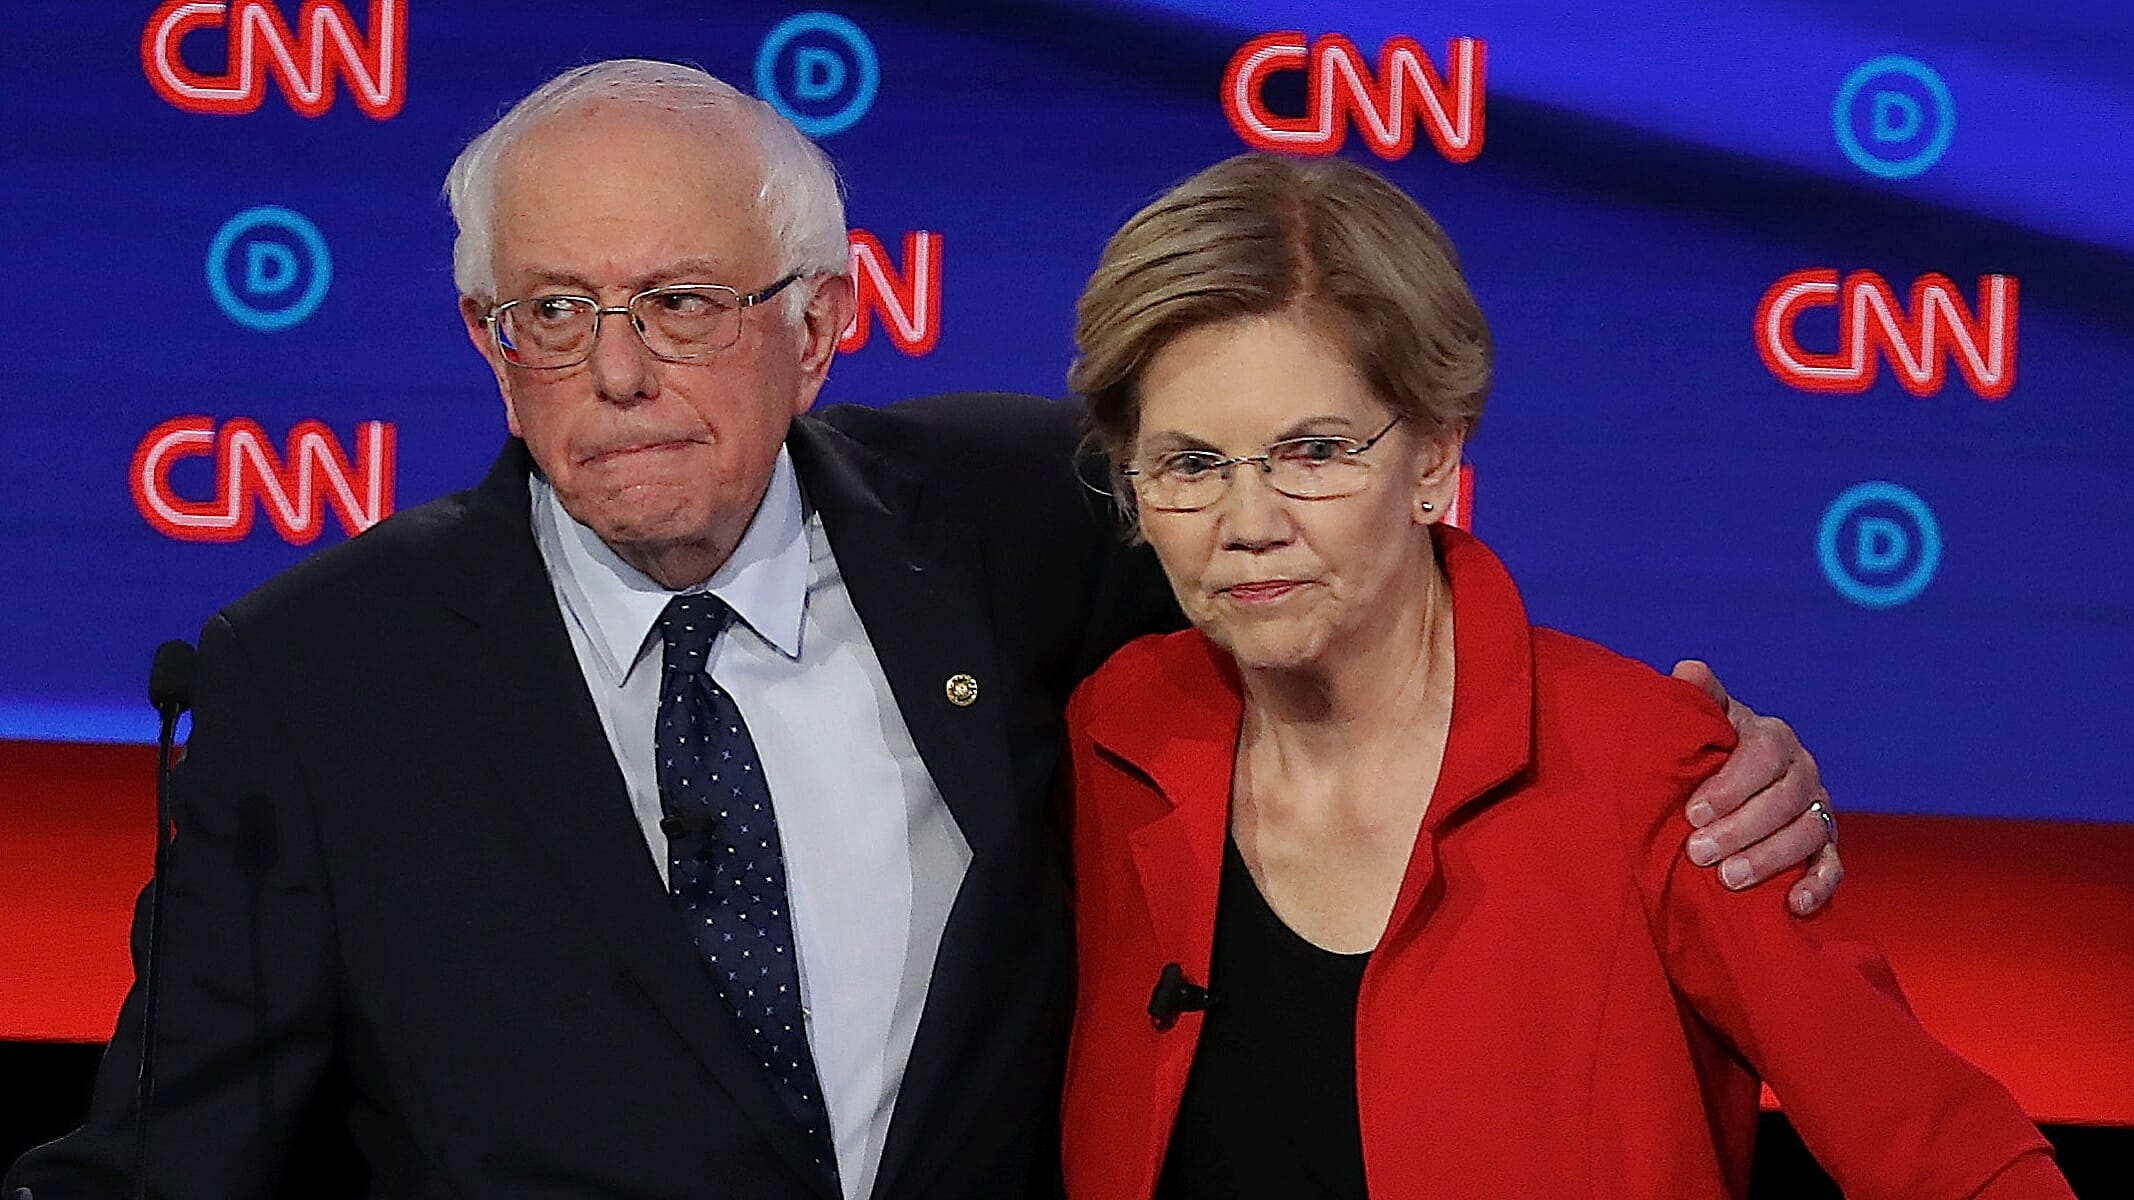 A Nevada Culinary Union Tried to Lay a Trap for Bernie Sanders, and Elizabeth Warren Played Along